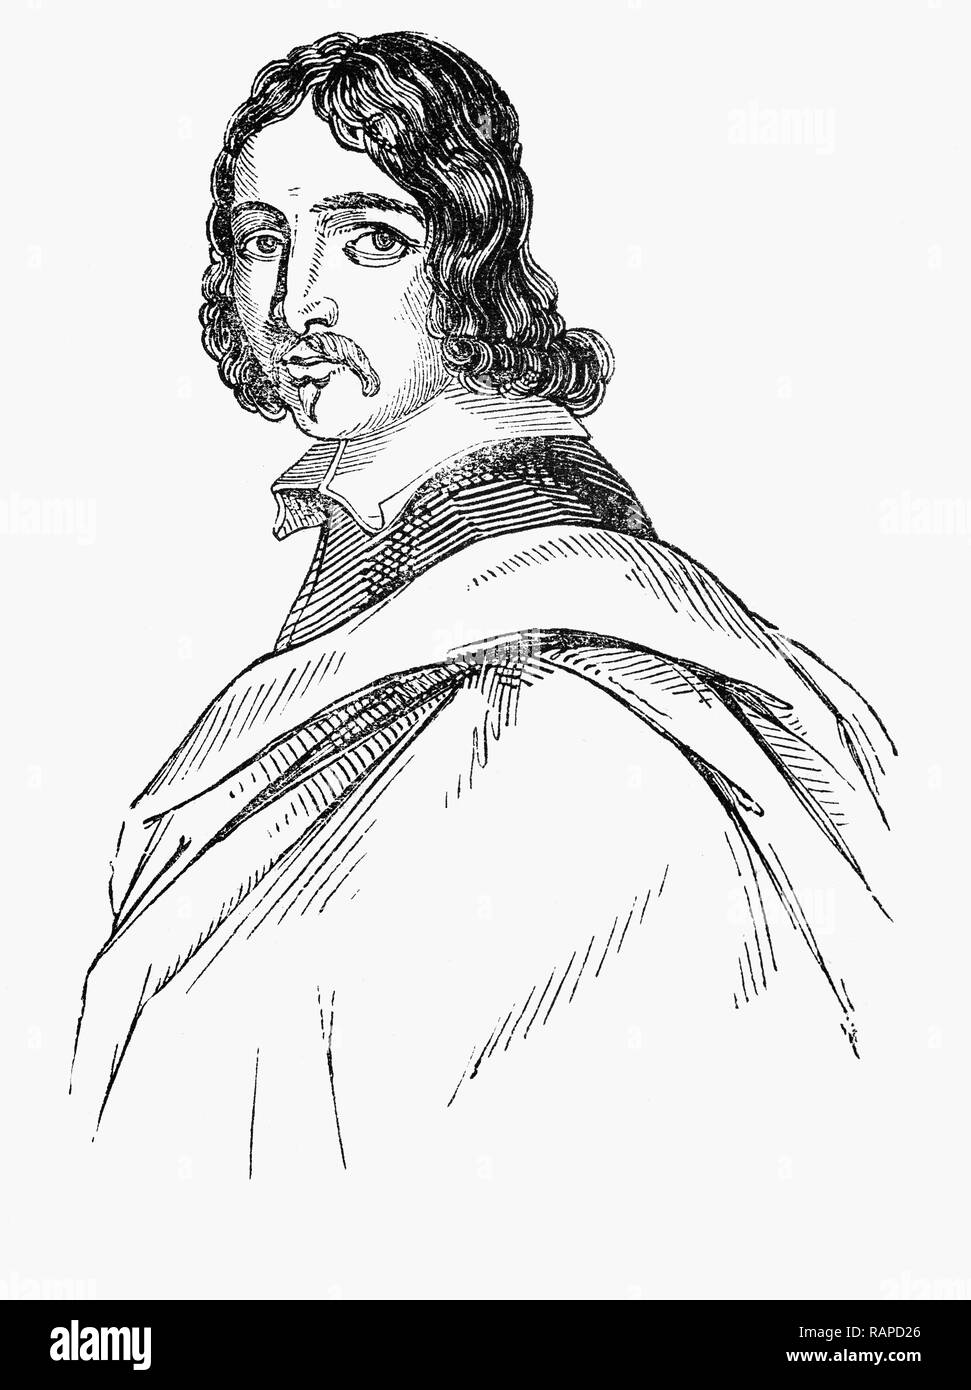 Francis Moore (1657 – 1715) was a British physician and astrologer who wrote and published what later became Old Moore's Almanack.  He was born into poverty in Bridgnorth. Moore was self-educated, learned to read by himself, and after becoming a physician and astrologer, served at the court of Charles II of England.  The almanac that bears his name was first published in 1697, originally giving weather and astrological predications, and is still published annually. Stock Photo